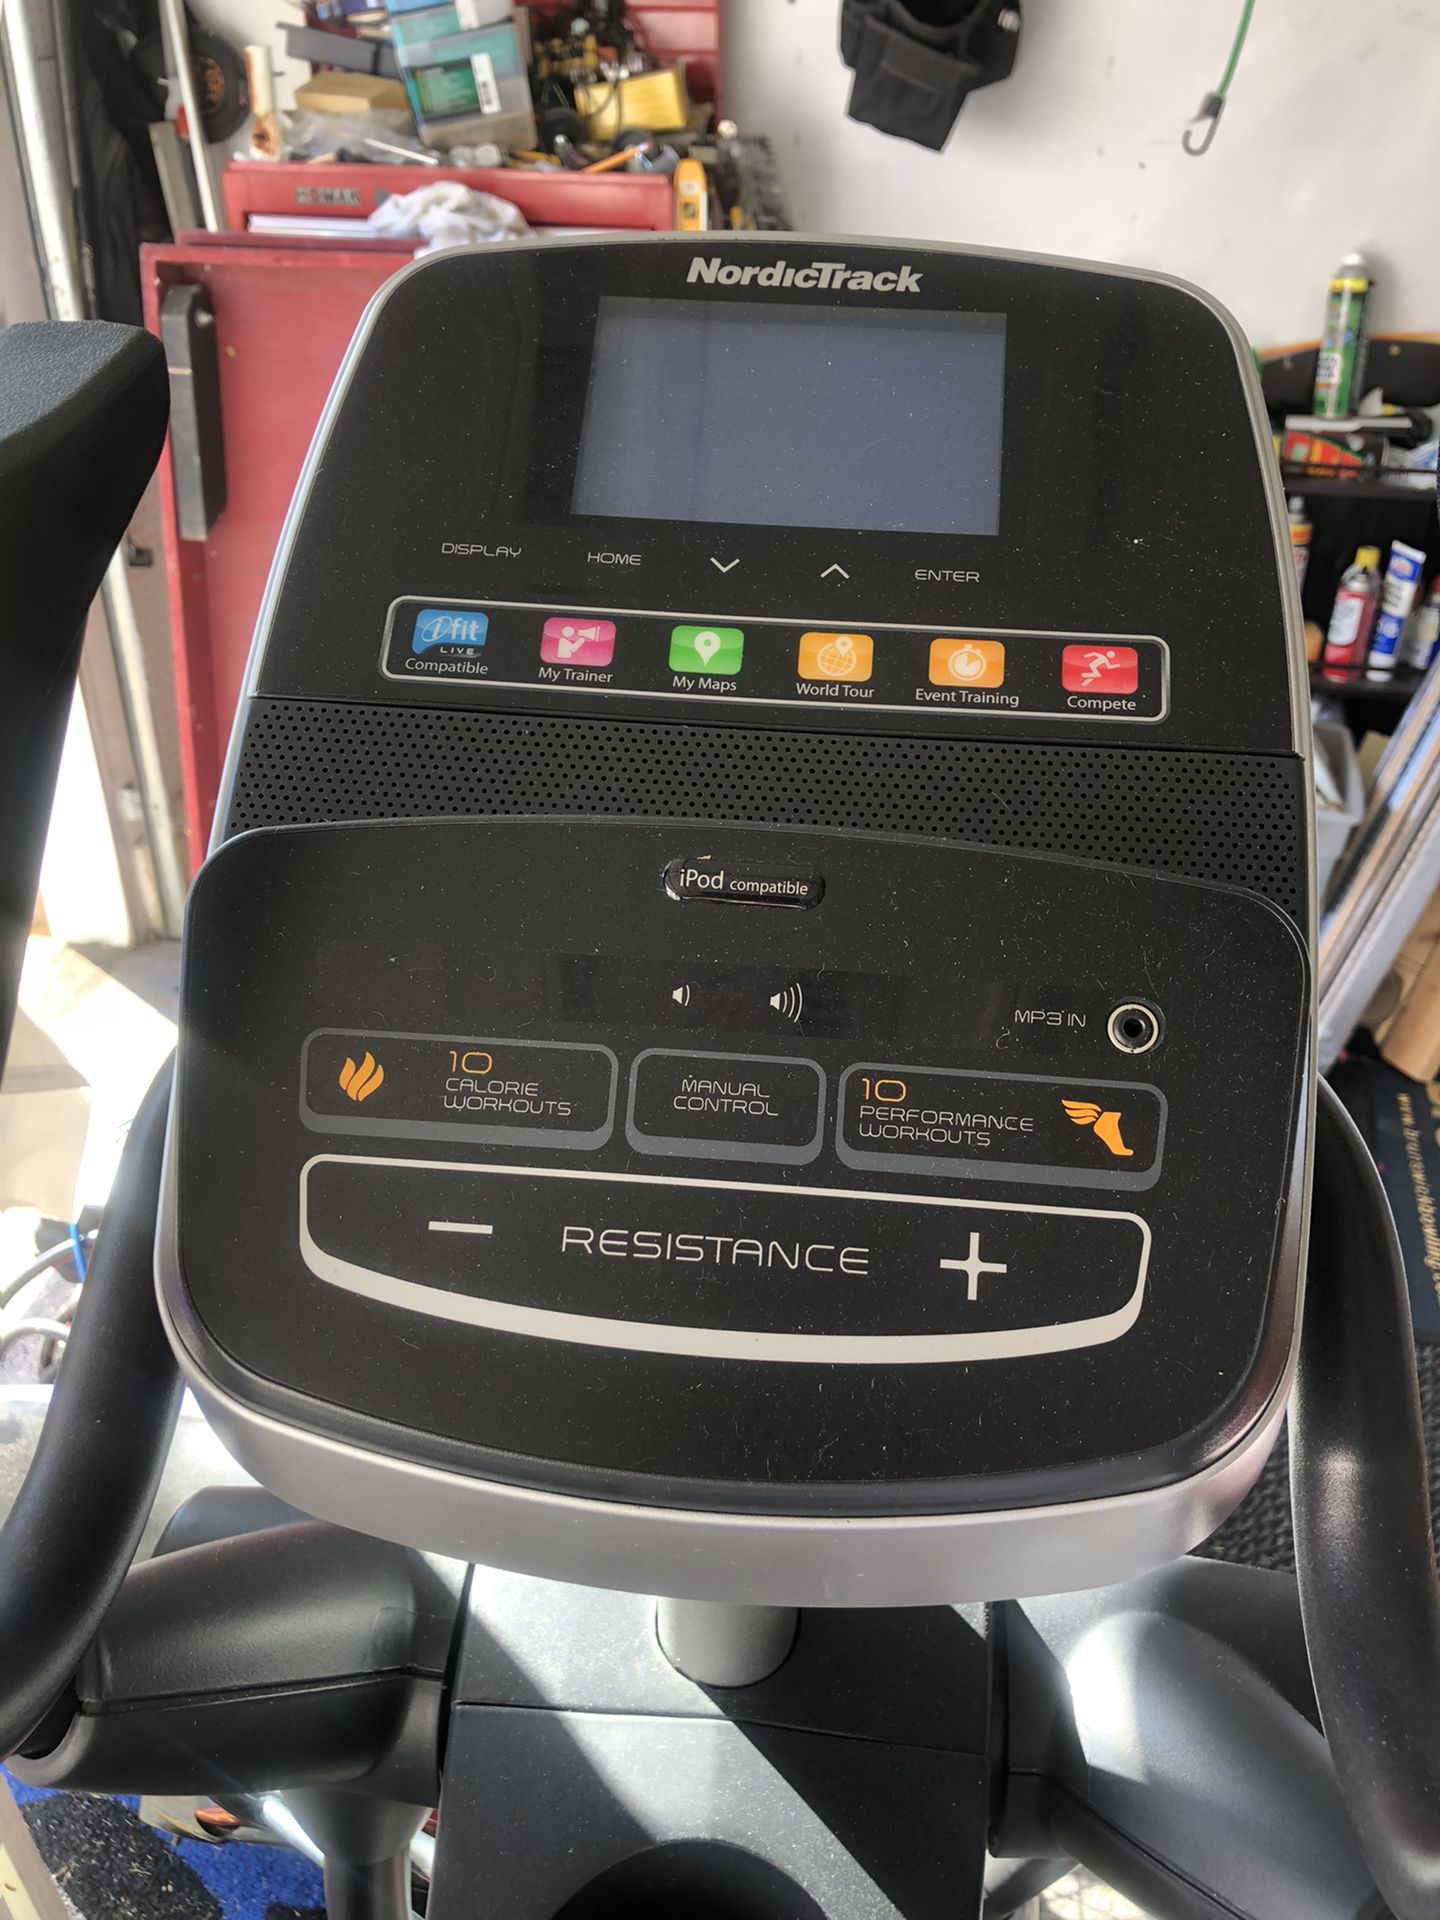 NordicTrack E5.5 Elliptical for Sale in Gastonia, NC - OfferUp